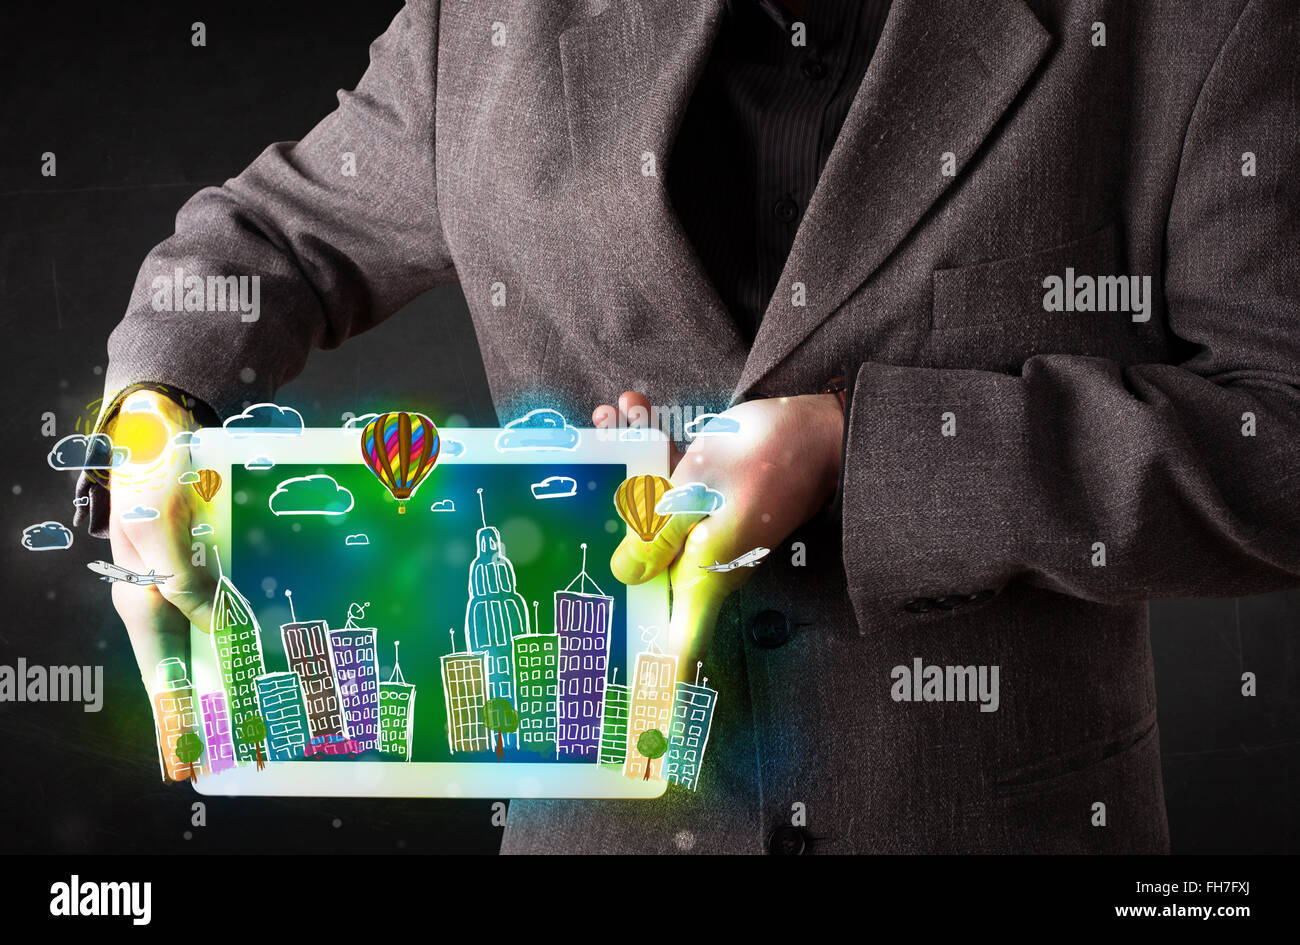 Young person showing tablet with hand drawn cityscape Stock Photo